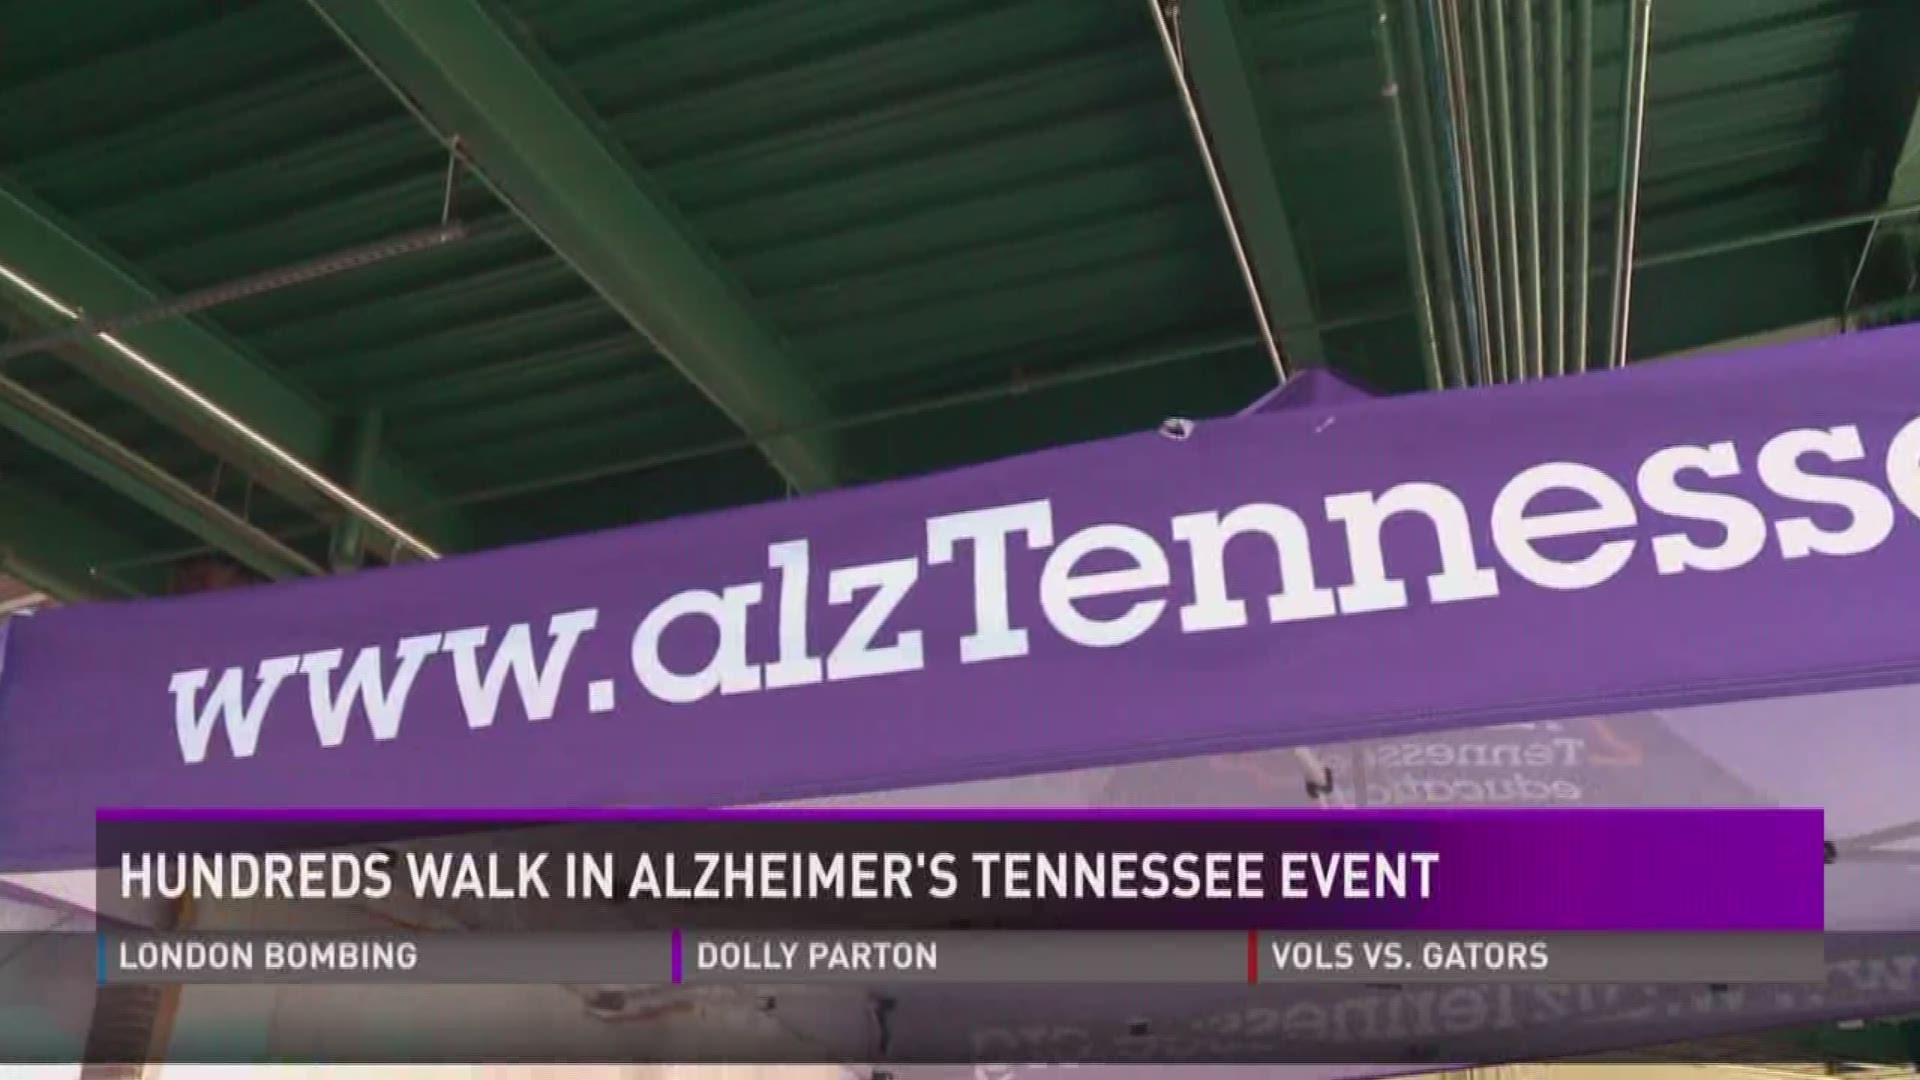 Hundreds walk in 25th anniversary of Alzheimer's Tennessee event.